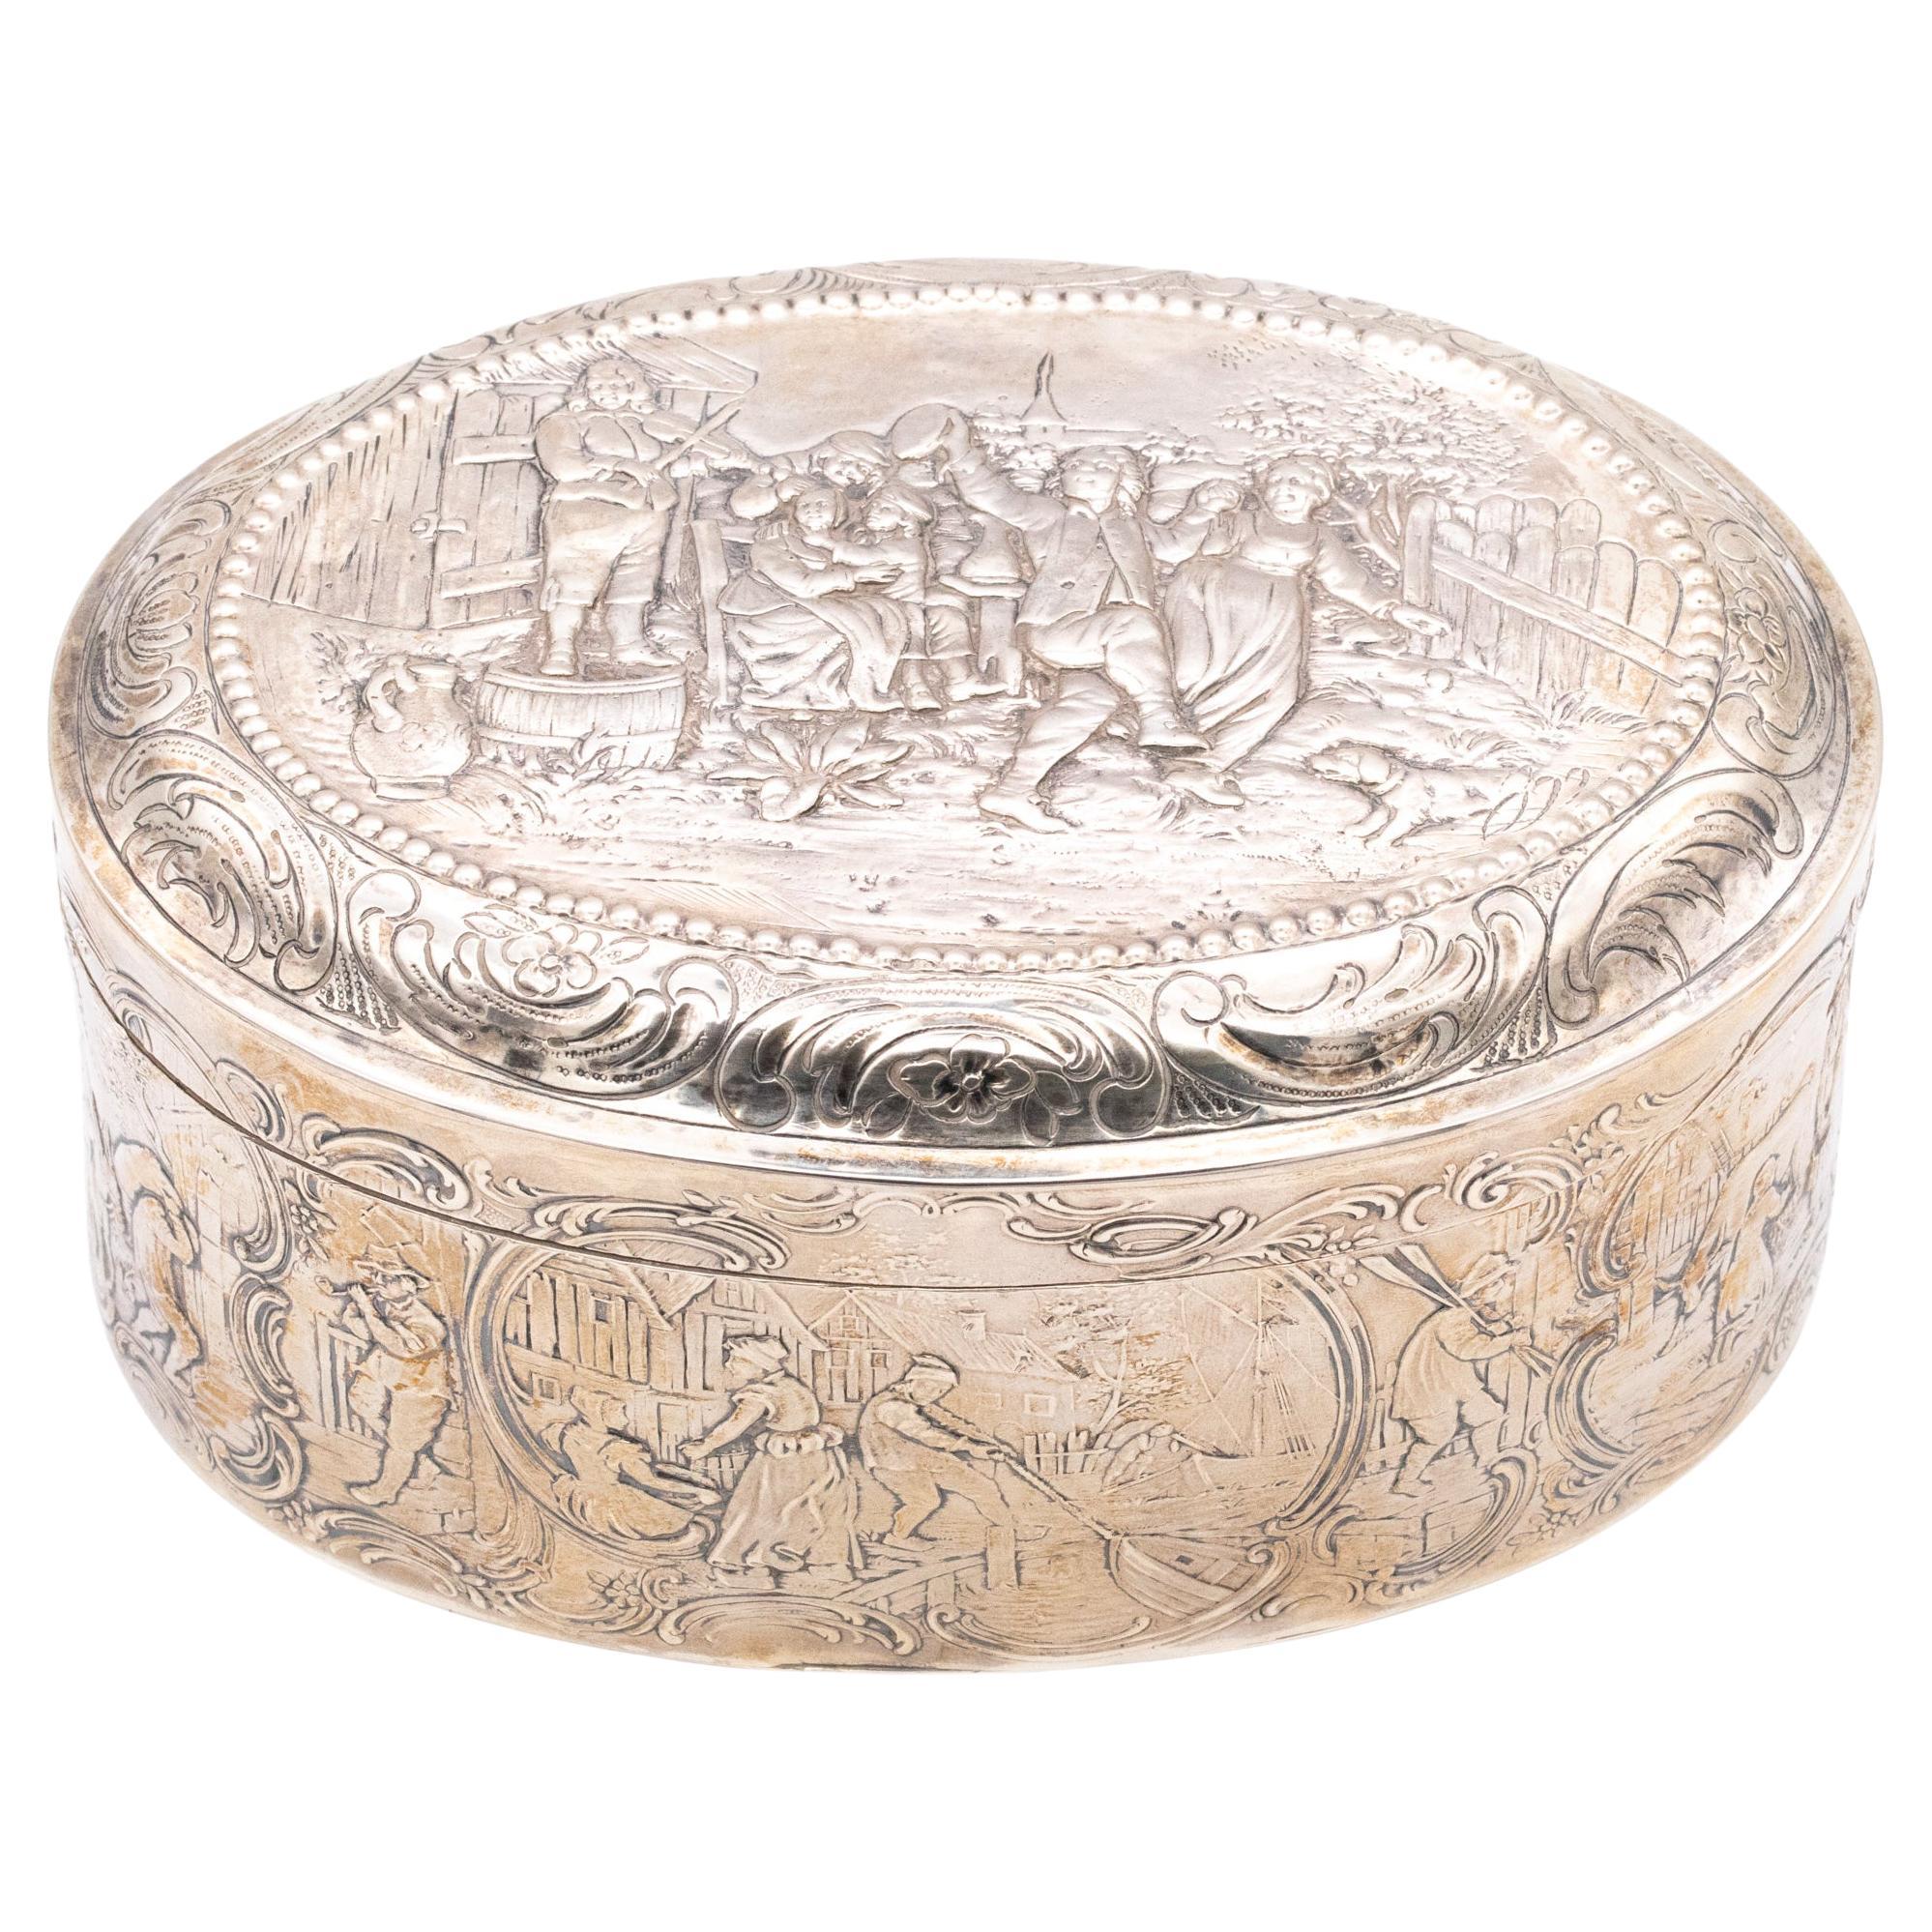 Dutch Netherlands 1872 Antique Oval Repousse Trinket Box in .875 Sterling Silver For Sale